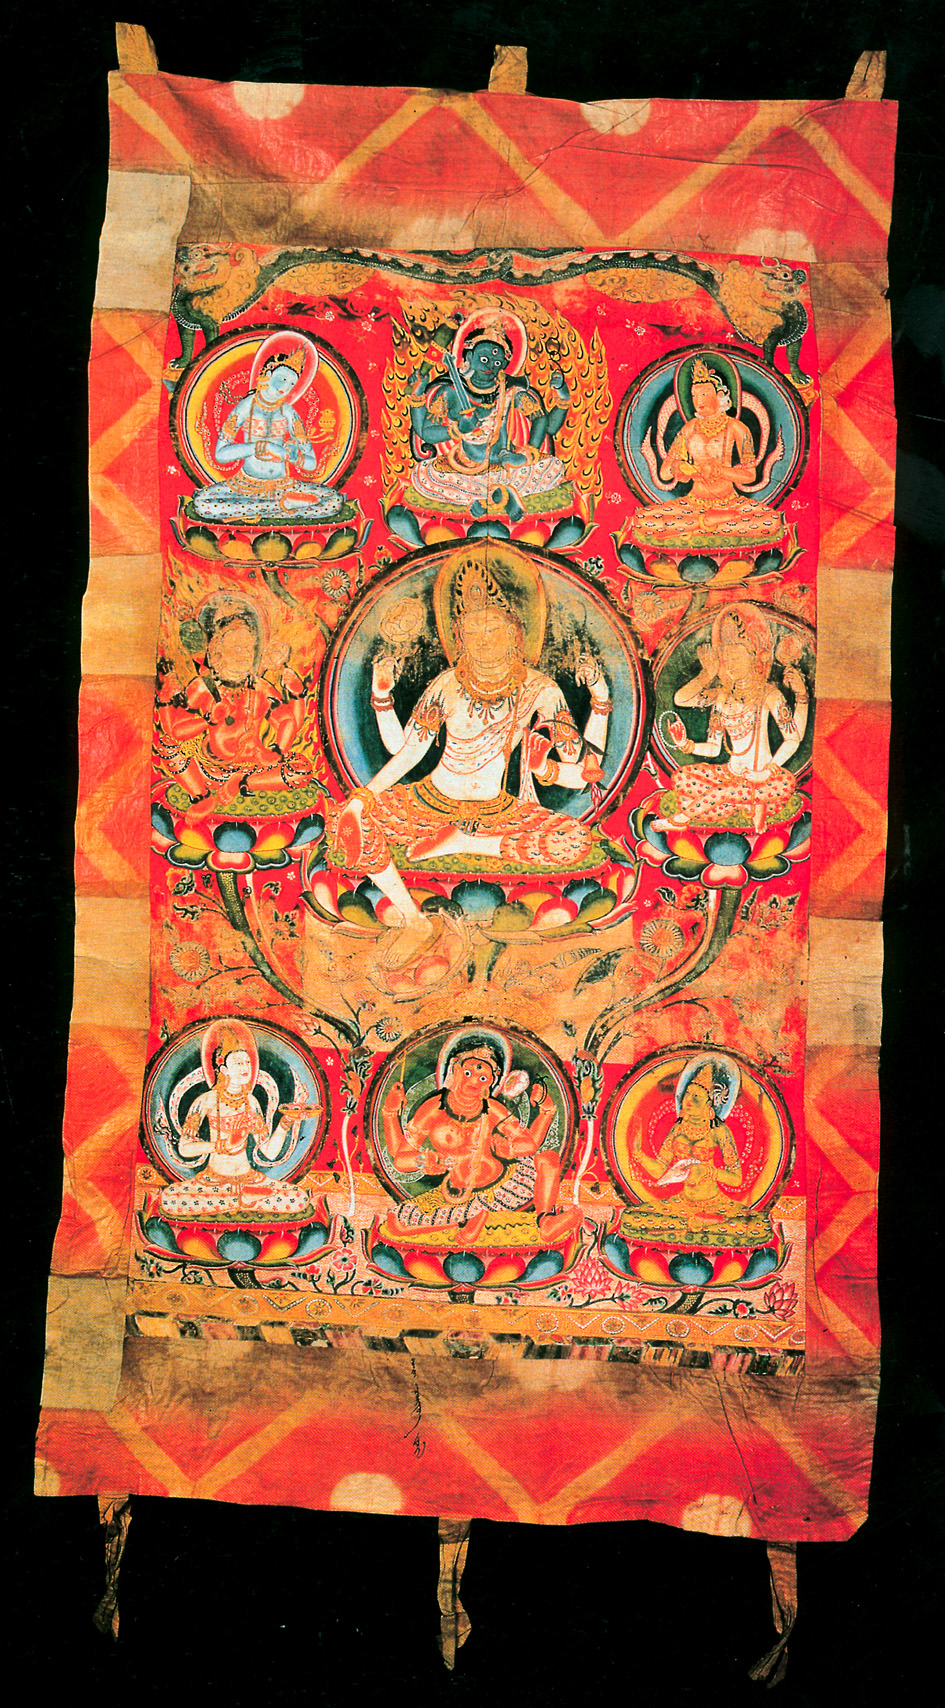 Rectangular textile depicting seated Bodhisattva surrounded by eight smaller deities against background of red and gold